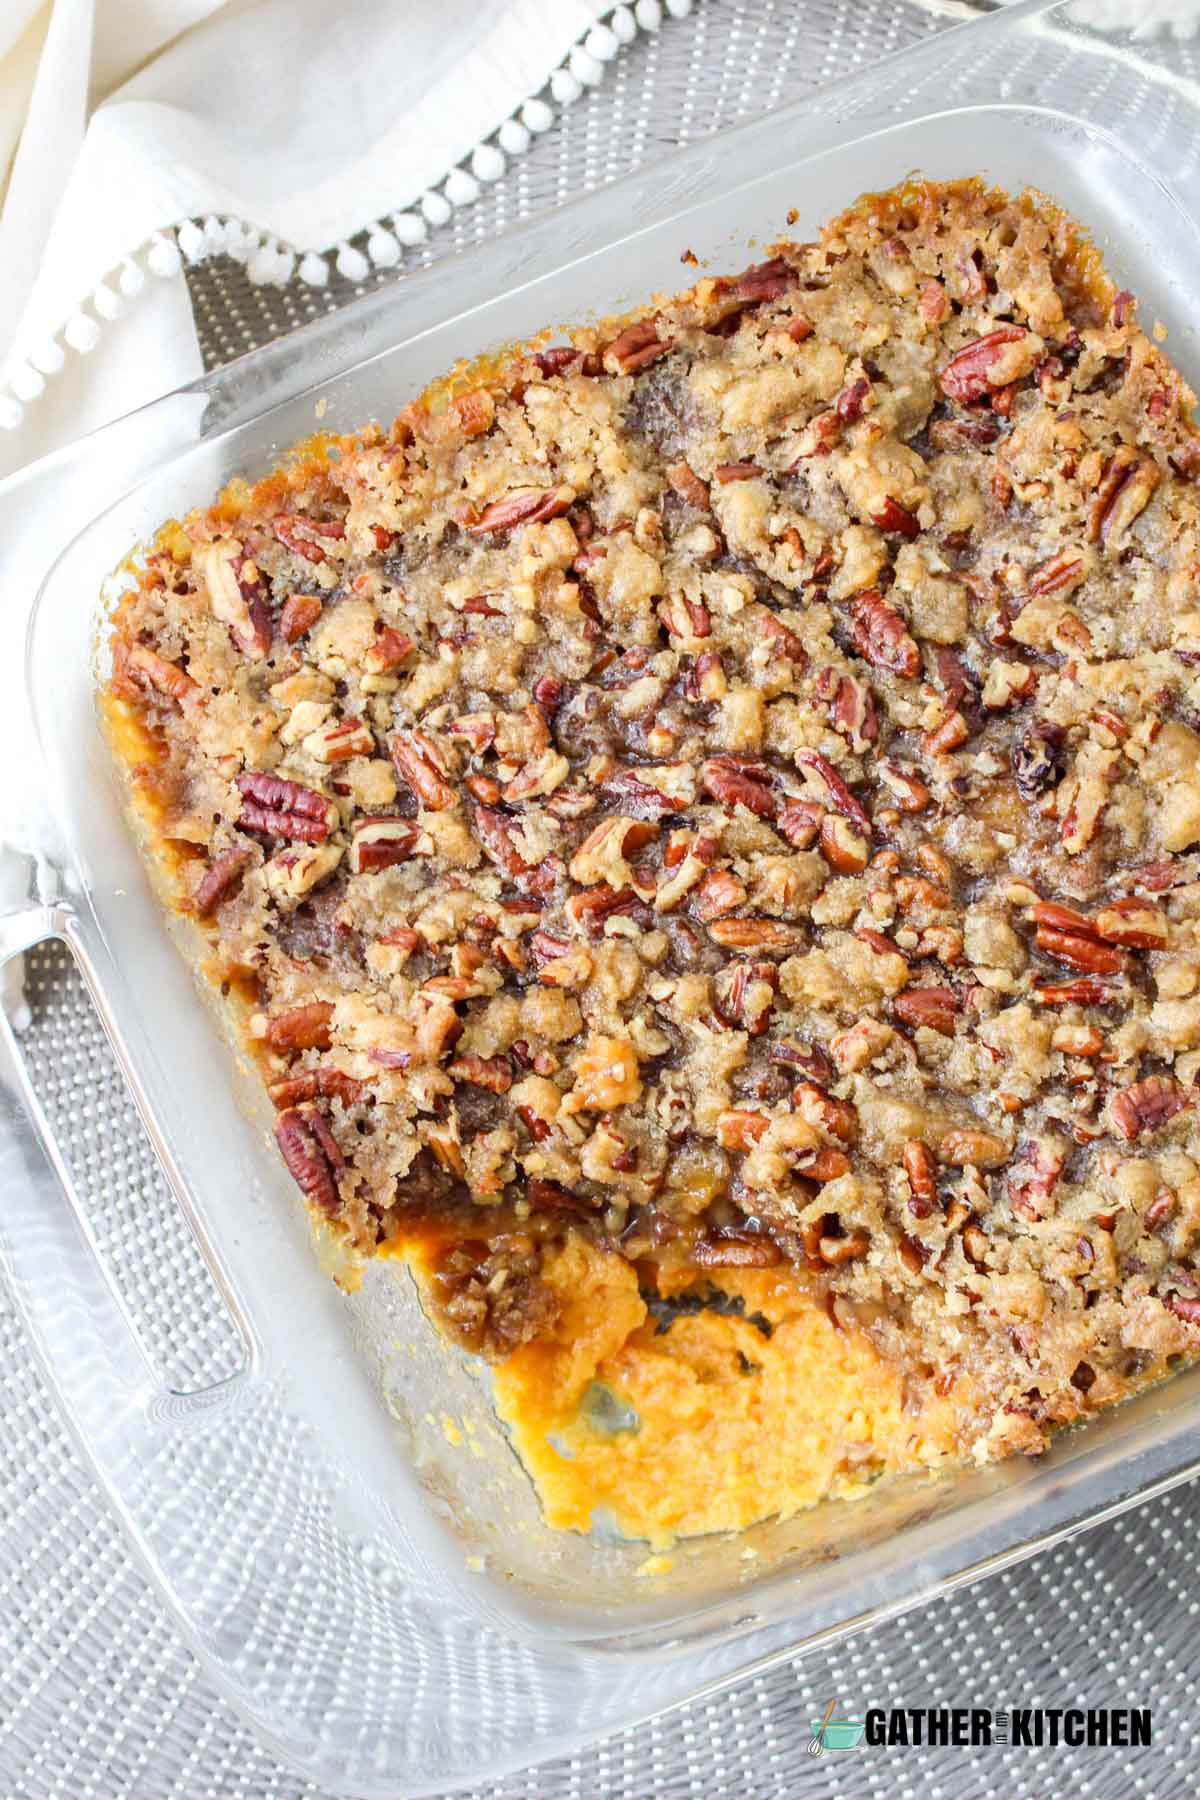 A tray of sweet potato casserole with a portion taken out.